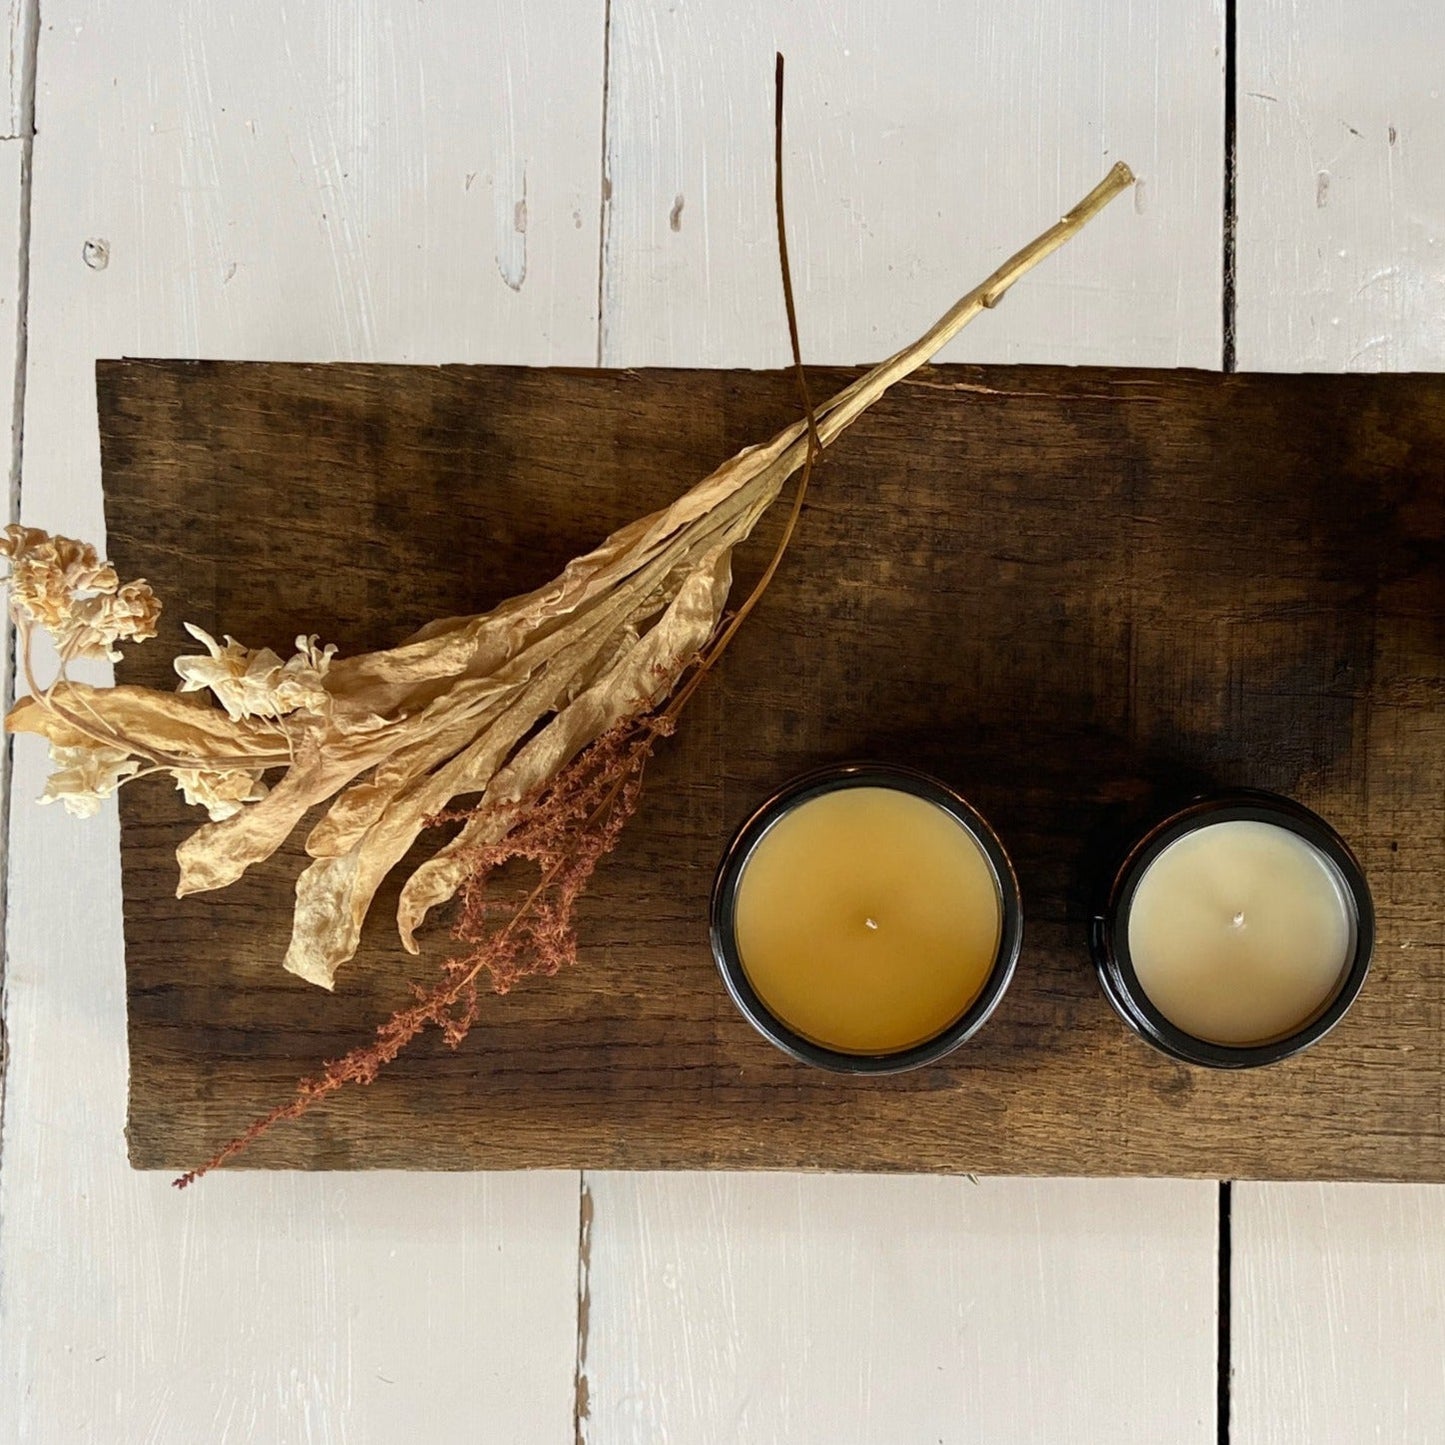 East London All Natural Candle Making Workshop | Tuesday 16th May, 6:30pm